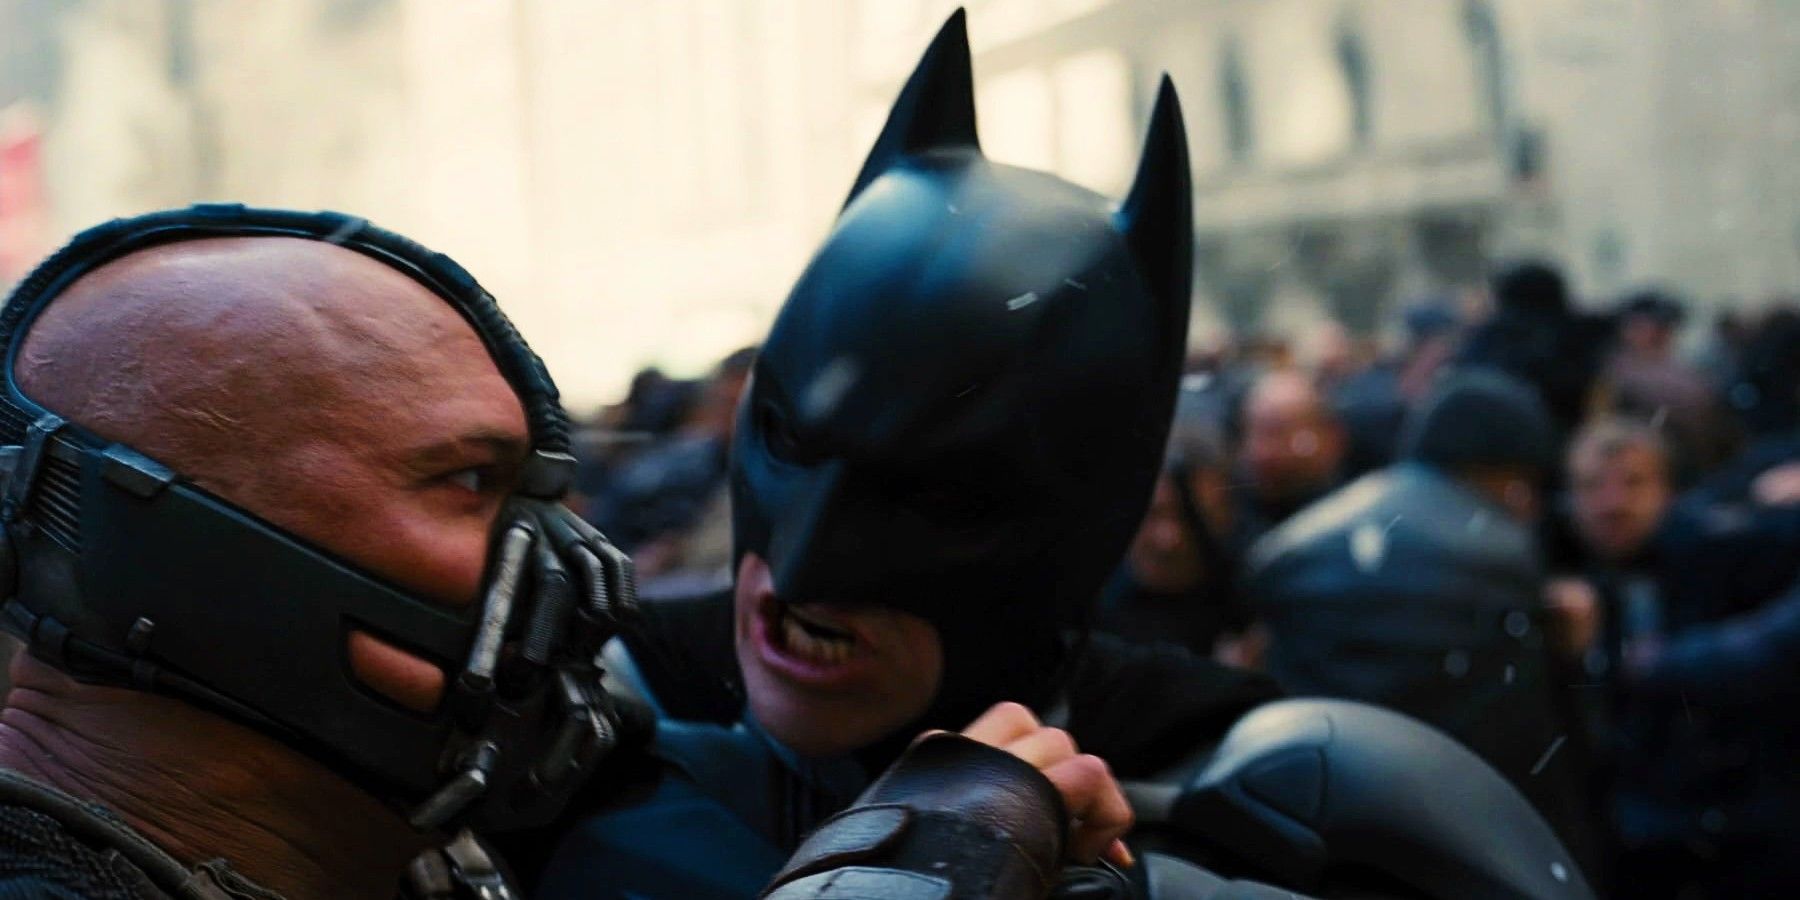 A scene from The Dark Knight Rises with Batman fighting Bane.